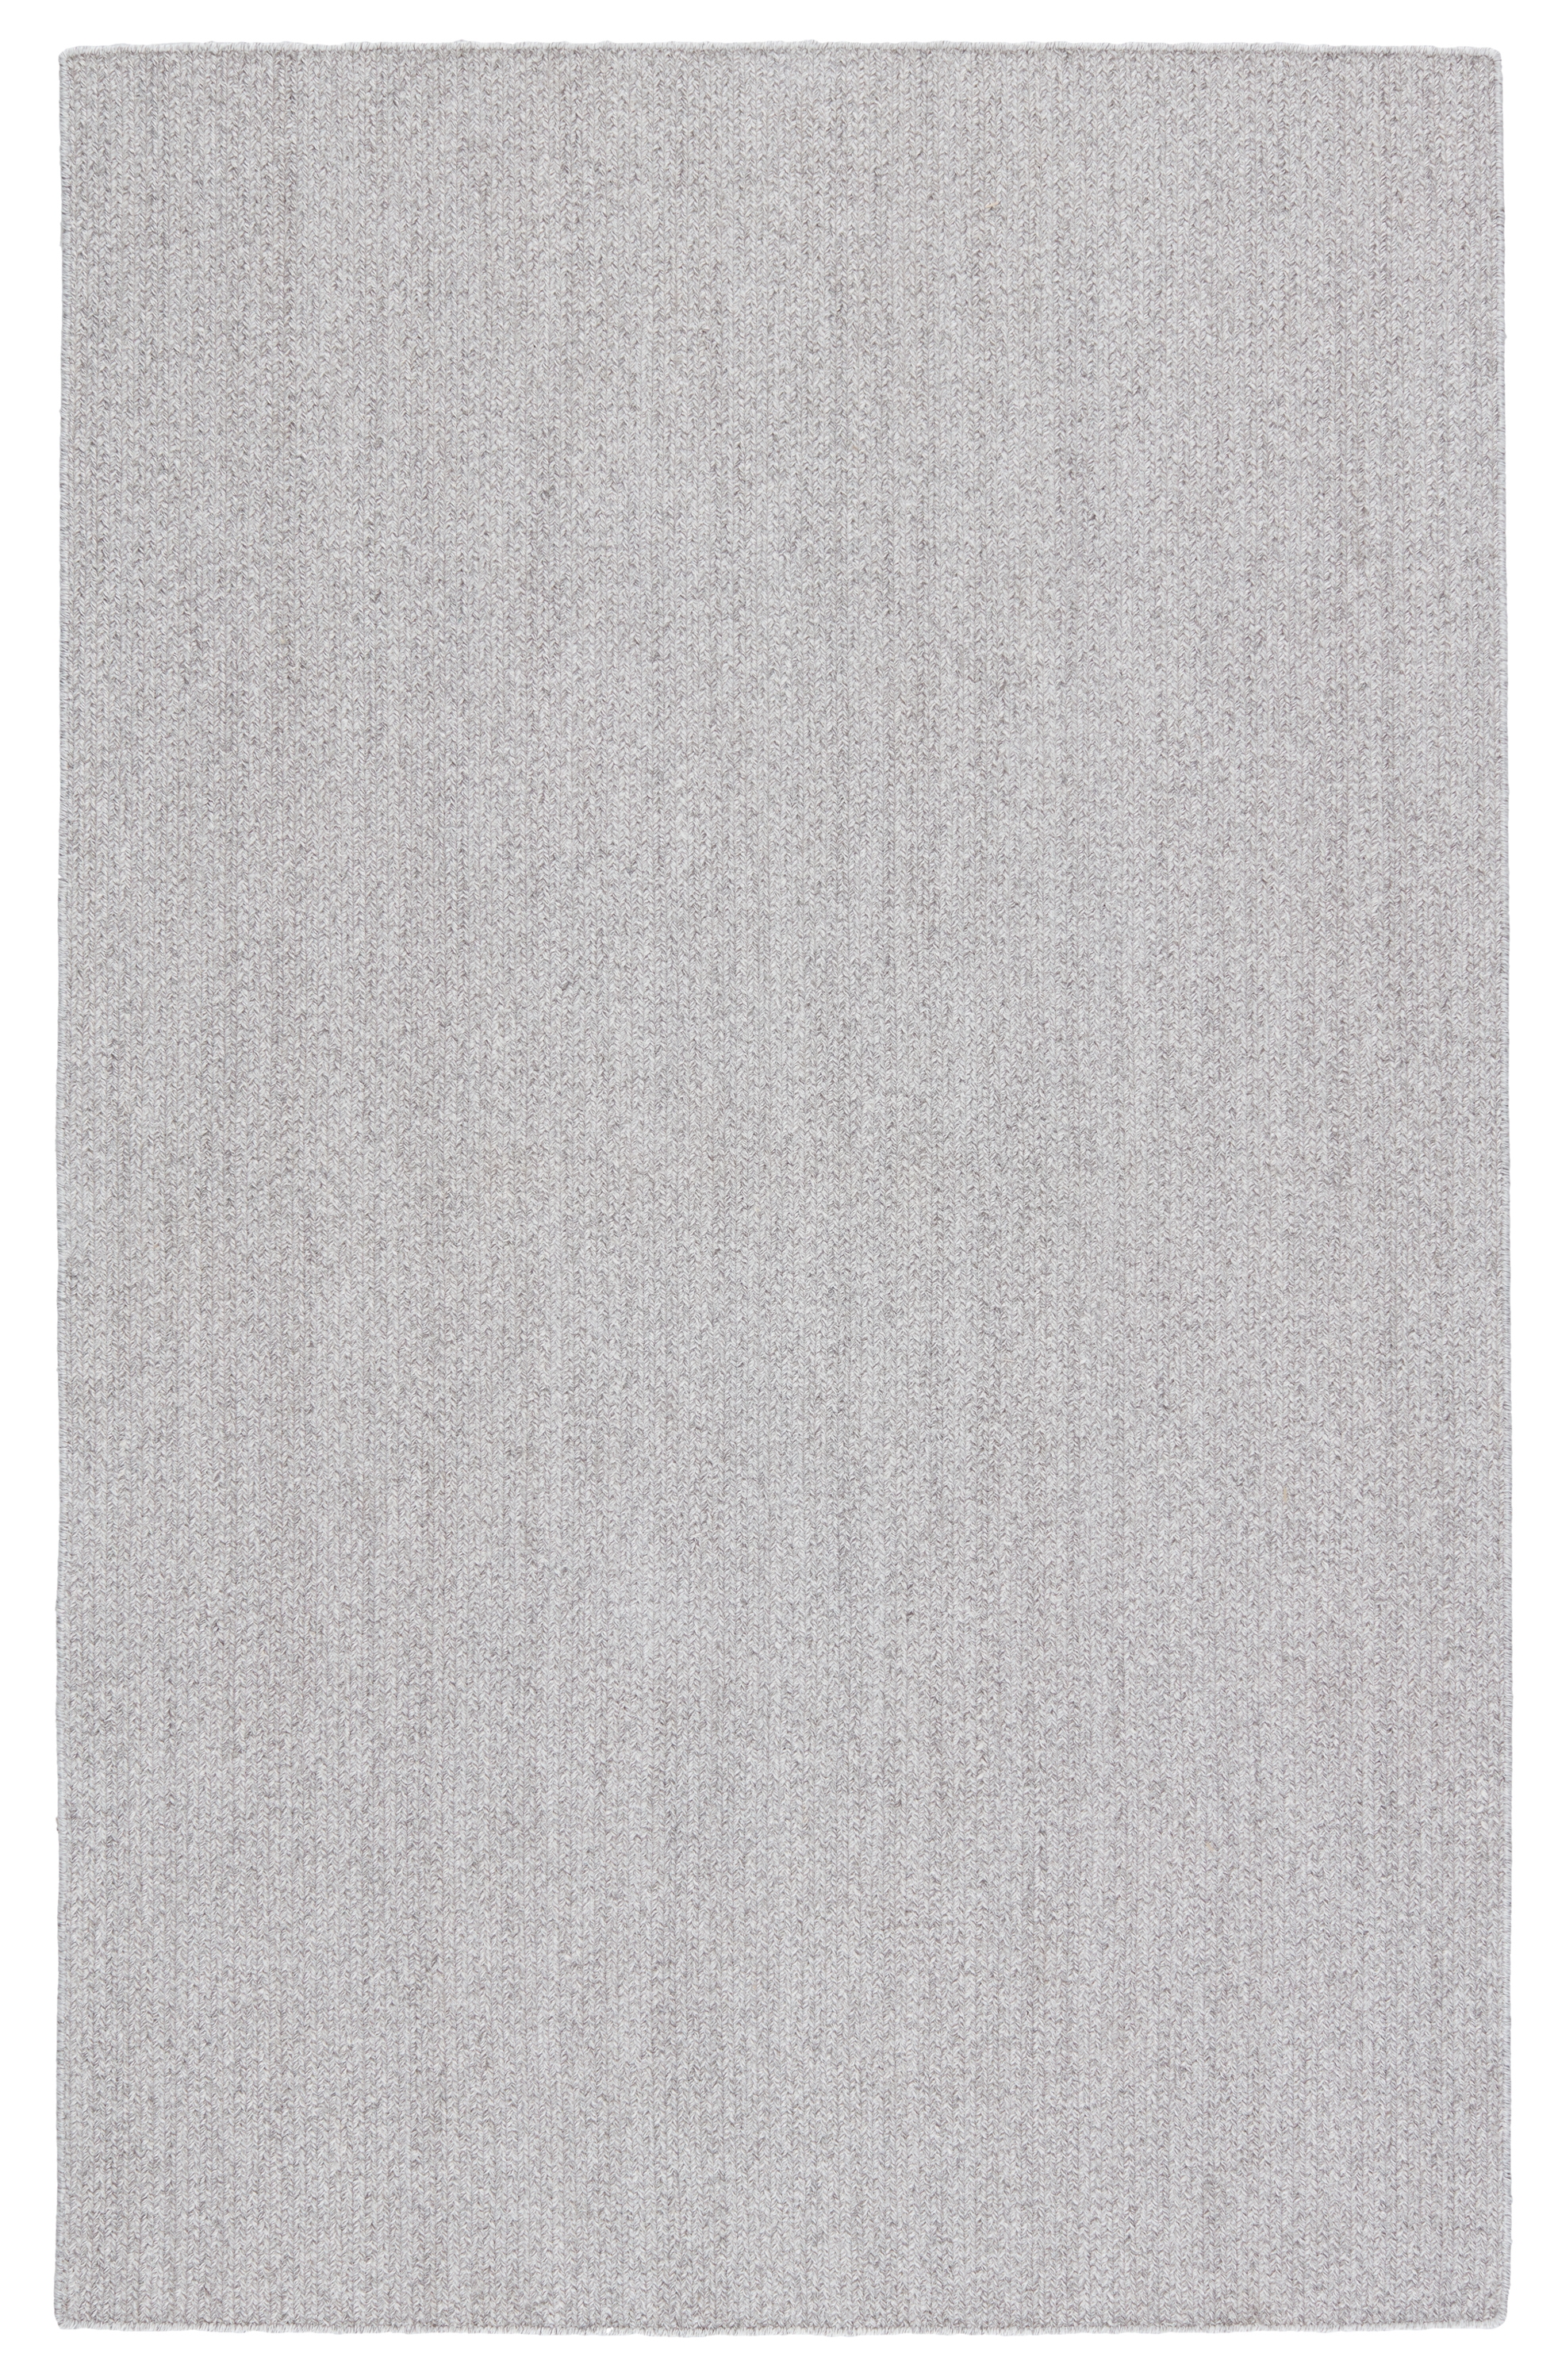 Maracay Indoor/ Outdoor Solid Light Gray/ White Area Rug (4'X6') - Image 0